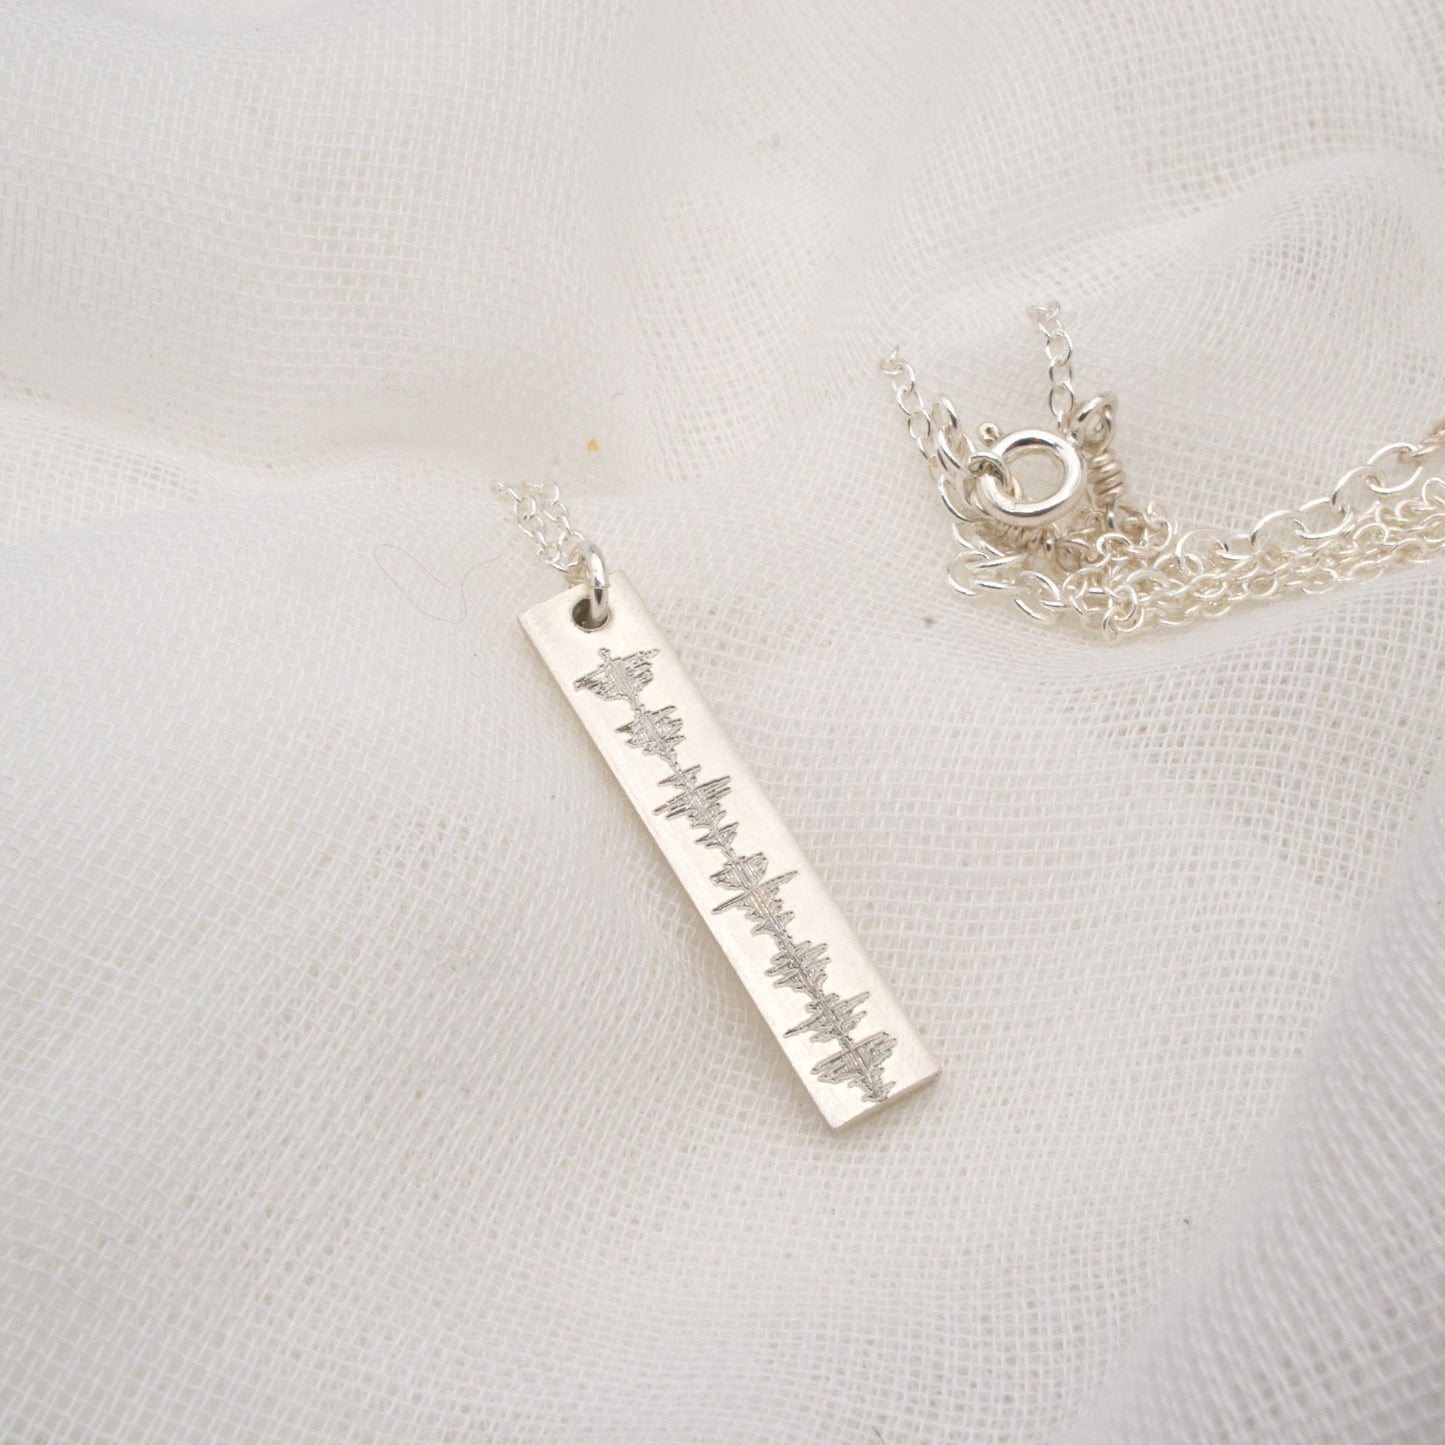 Soundwave pendant necklace in sterling silver - rectangle